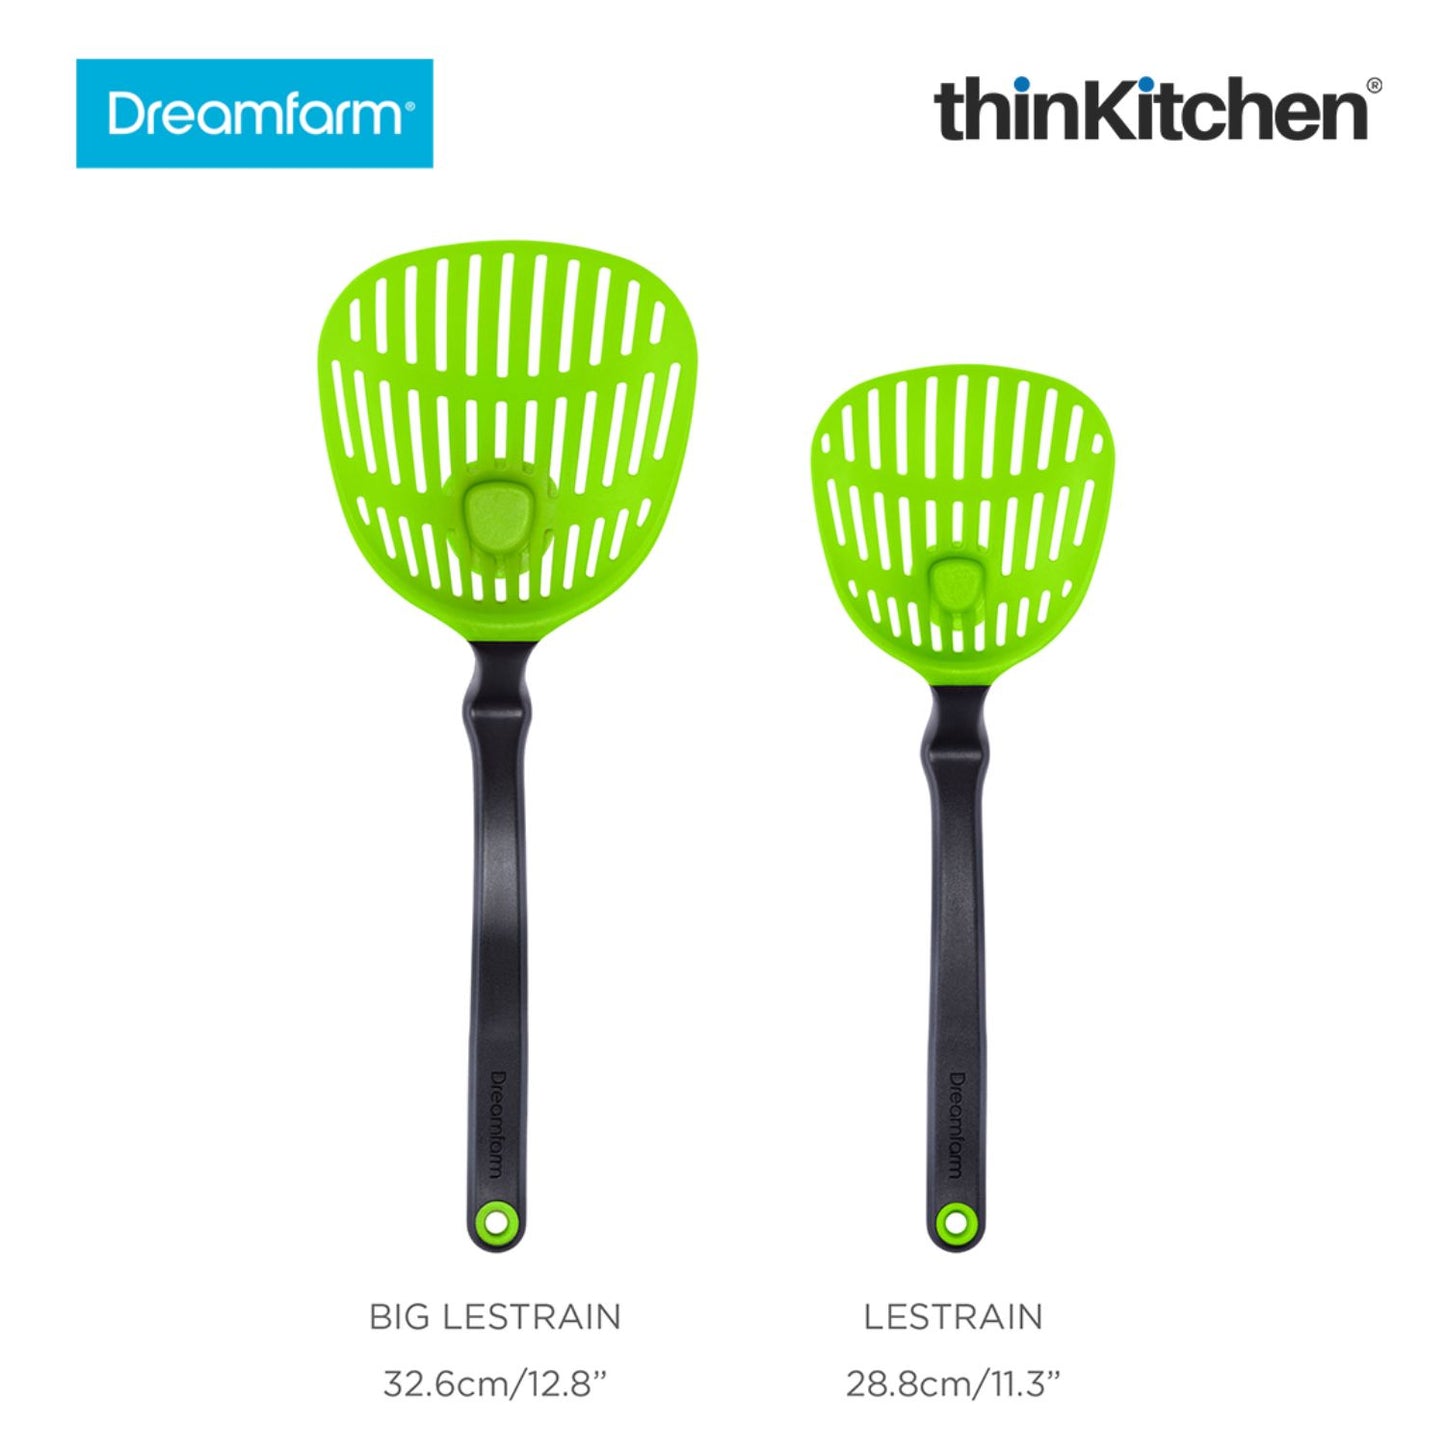 Dreamfarm Lestrain Drip Catching Sit Up Scoop Strainer Keeps Bench Tops Mess Free Flexible Dripless Slotted Spoon Food Strainer Green